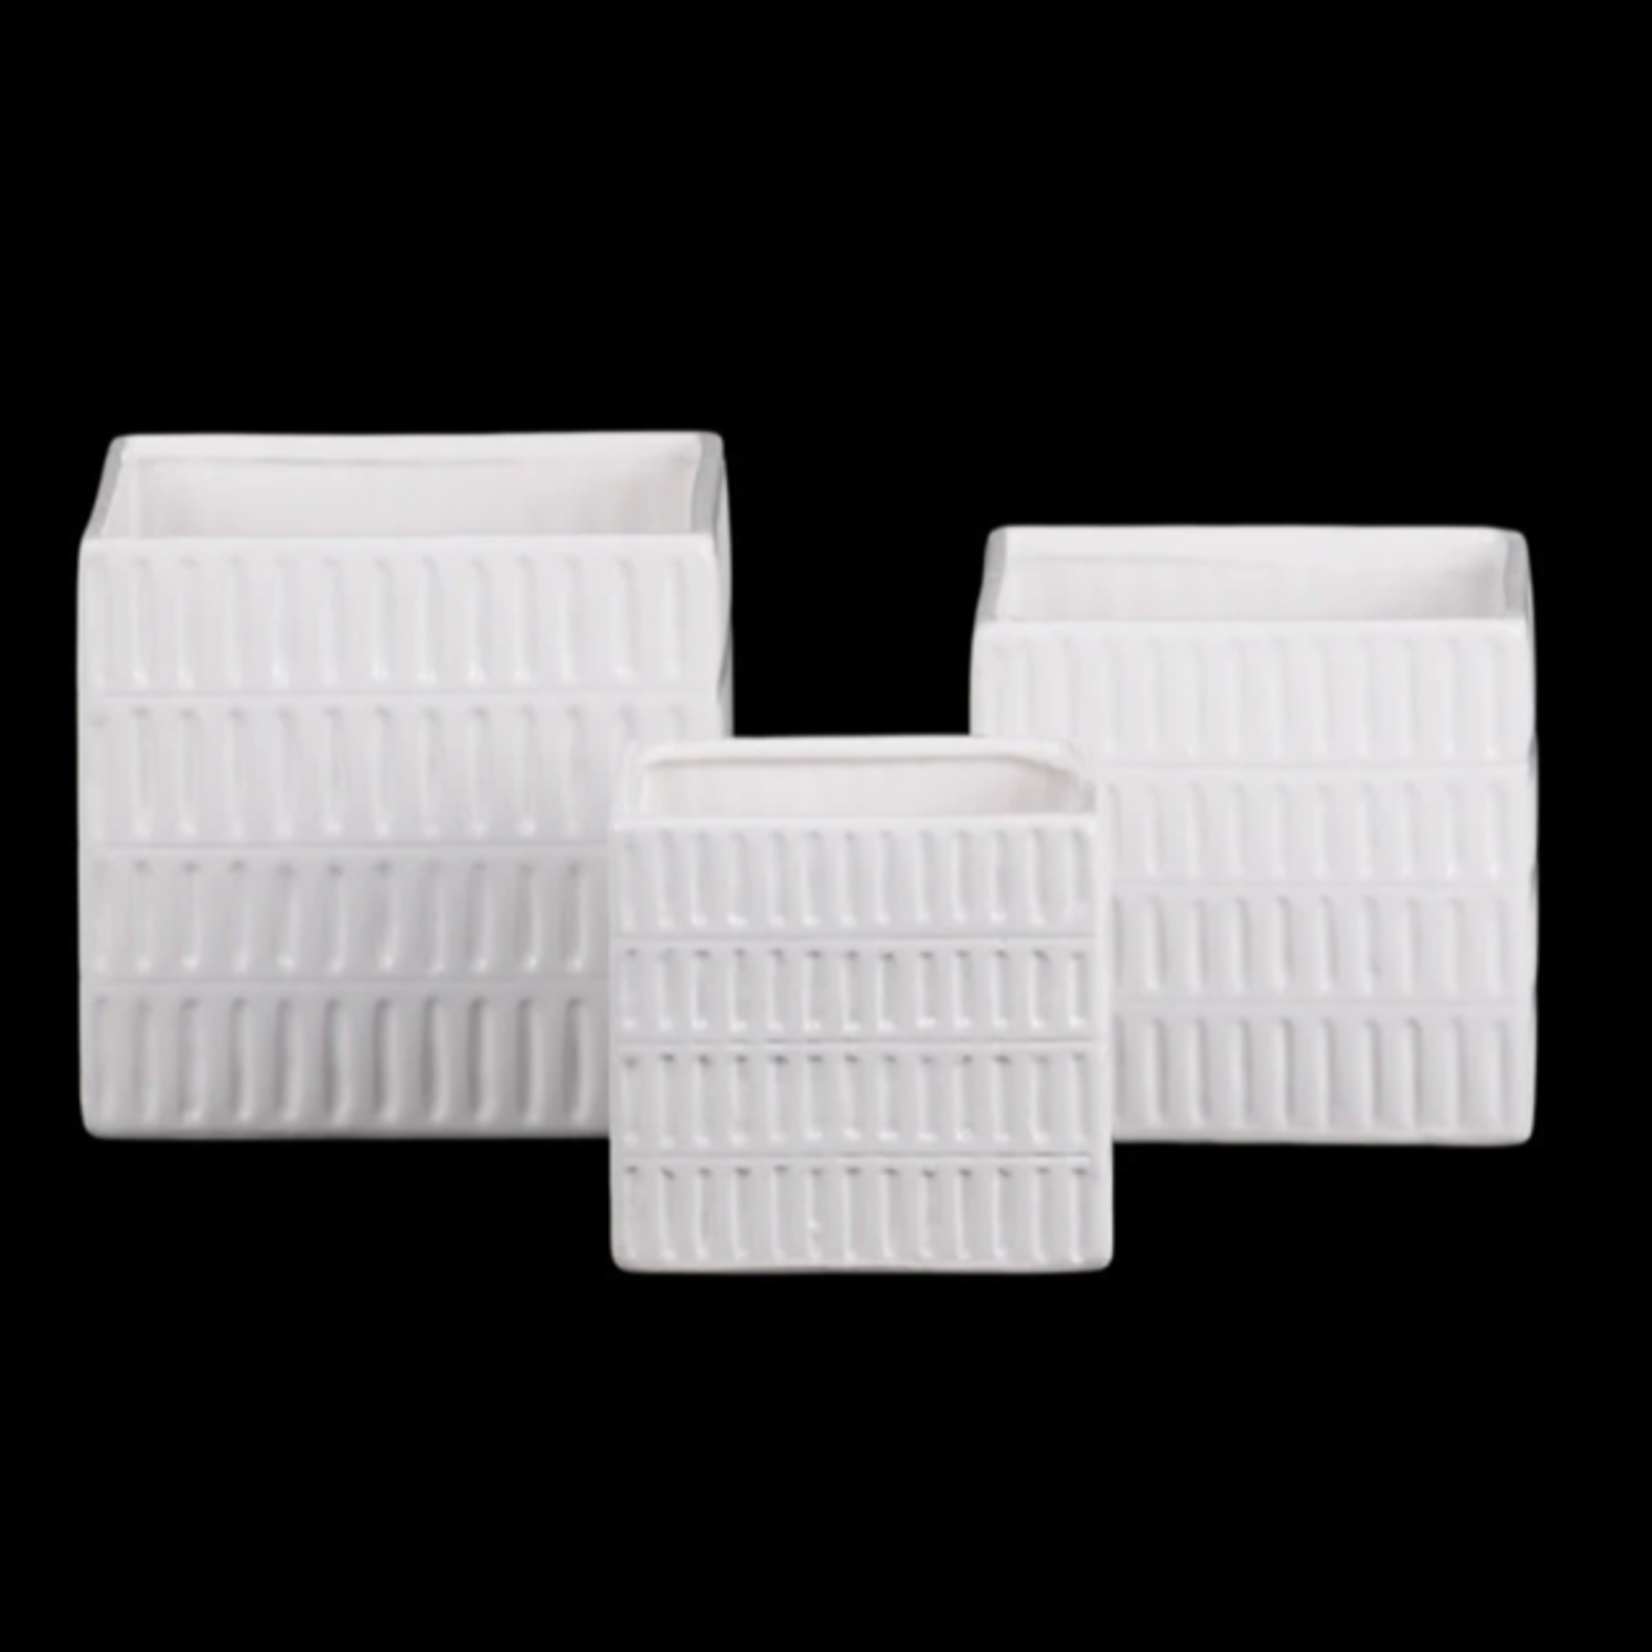 5.75”H X 6” X 6” LARGE WHITE Ceramic Square Pot with 4 Tier Embossed Oblong Lattice Design Body and Tapered Bottom